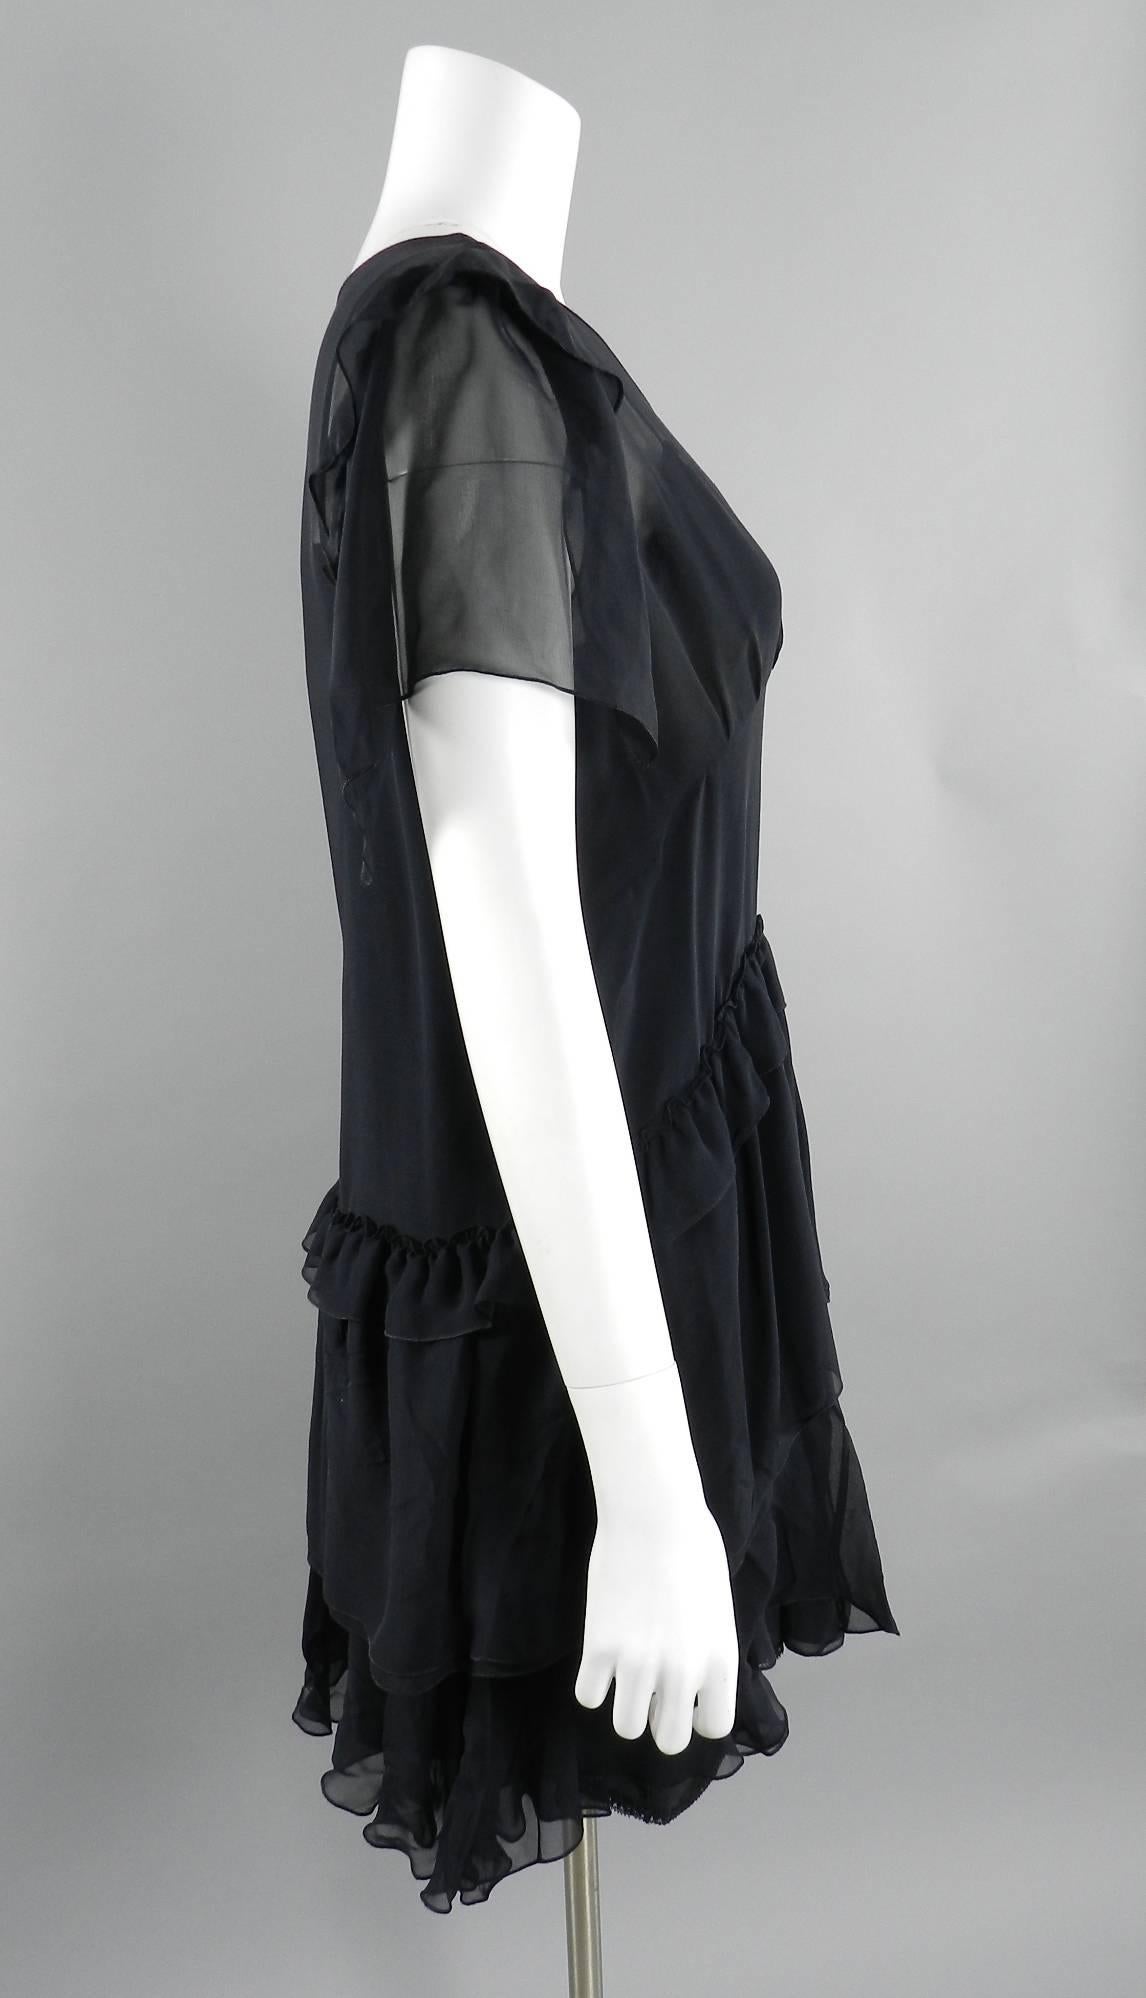 Miu Miu Black sheer silk 1920's inspired dress.  Straight cut body with ruffled skirt and matching black silk slip dress.  New with tags. Marked size IT 44 (about USA 8). To fit 35